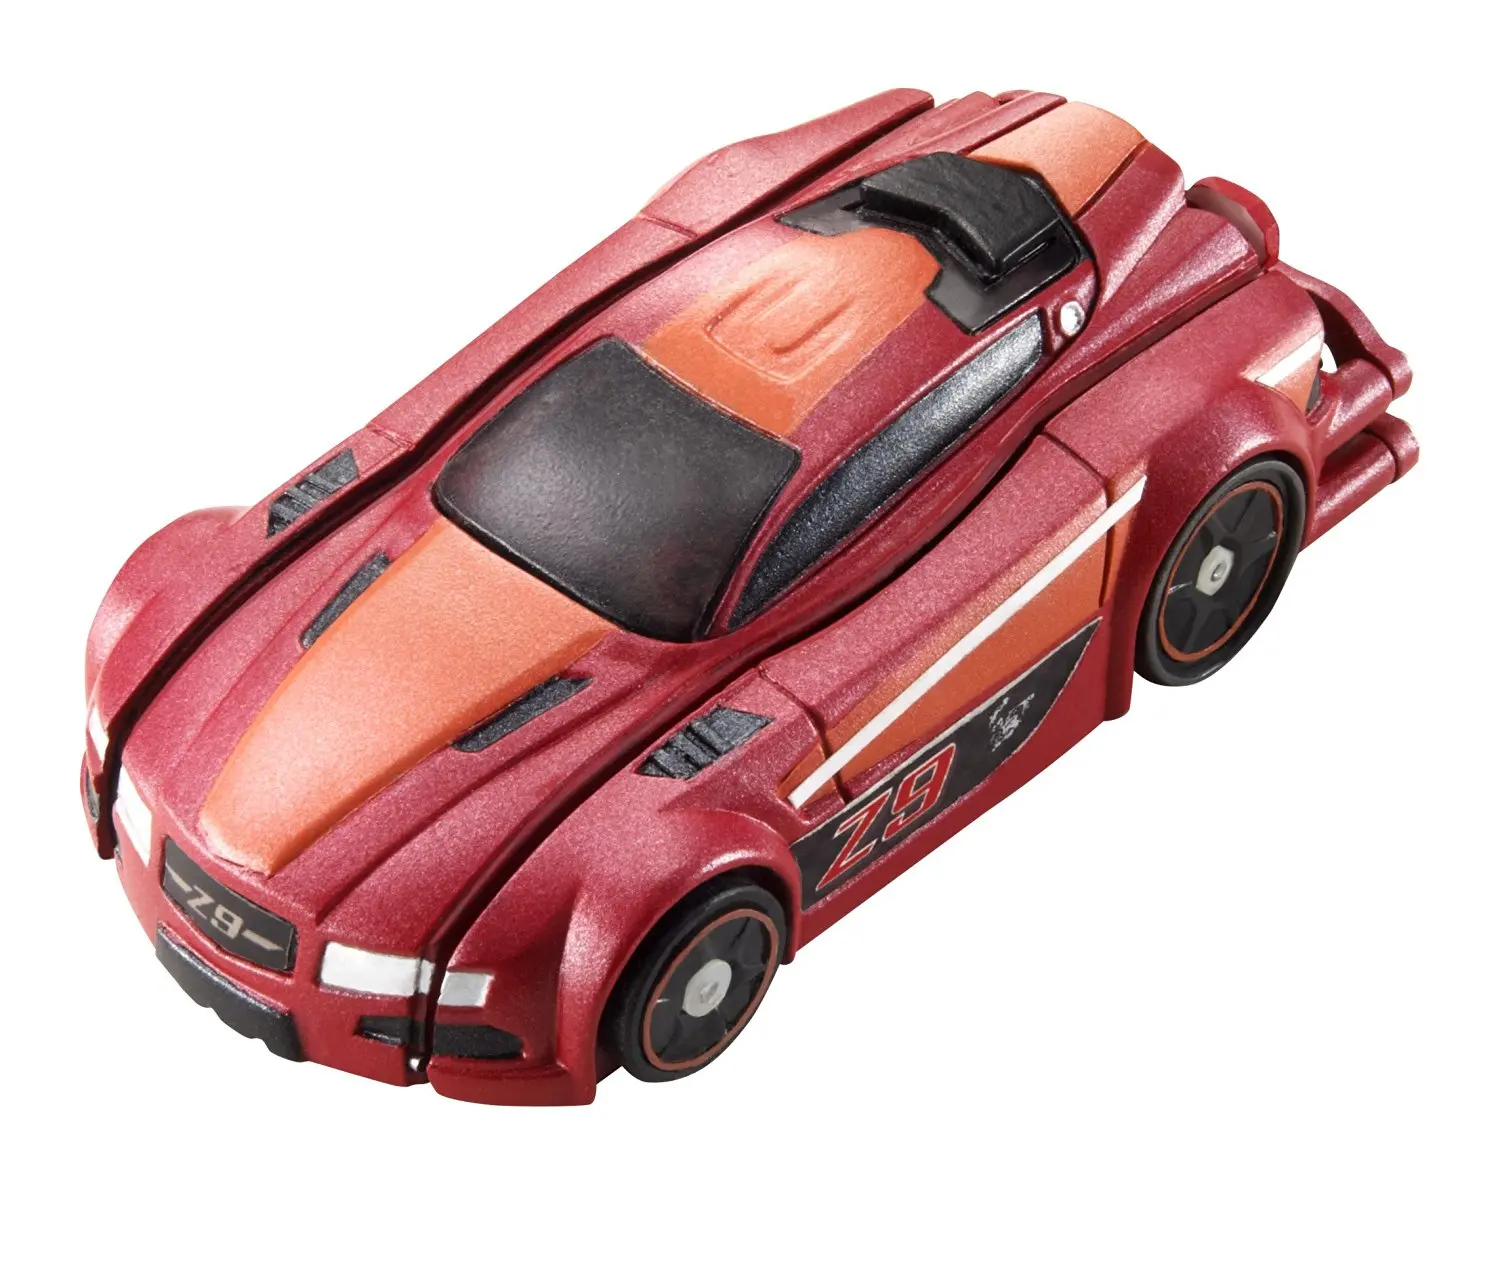 Hot Wheels R/C Stealth Rides Racing Car - Red. 